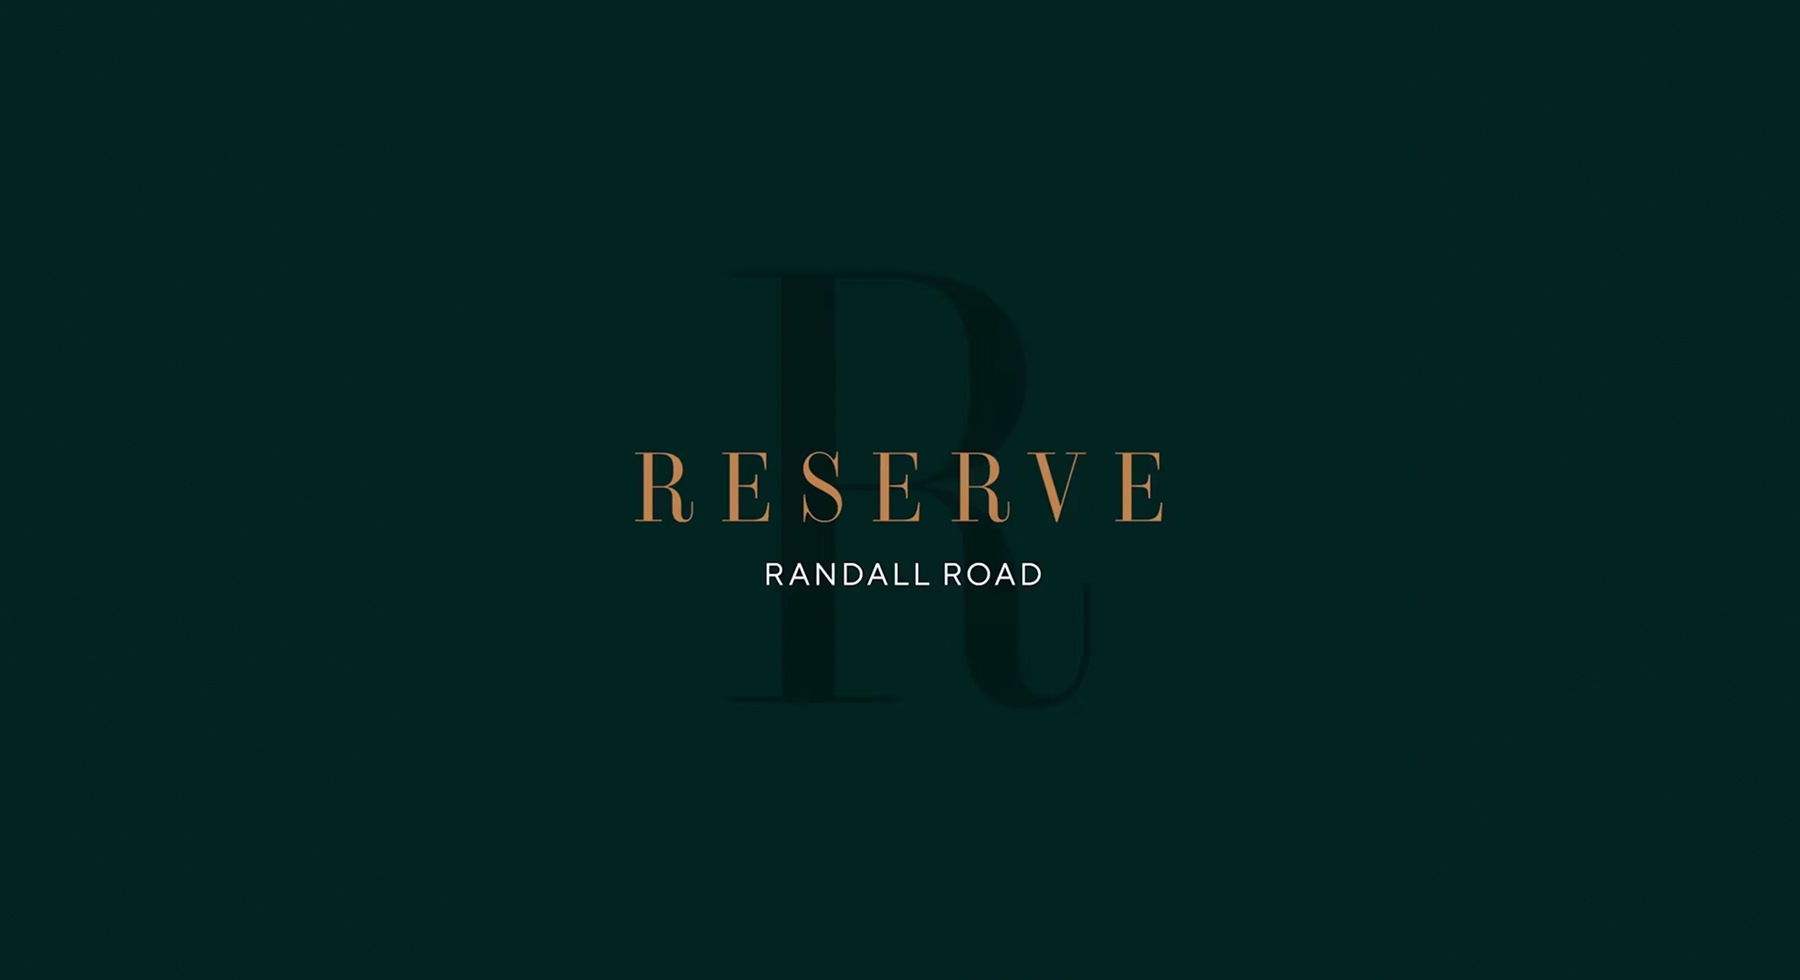 Reserve Randall Road Welcome Video